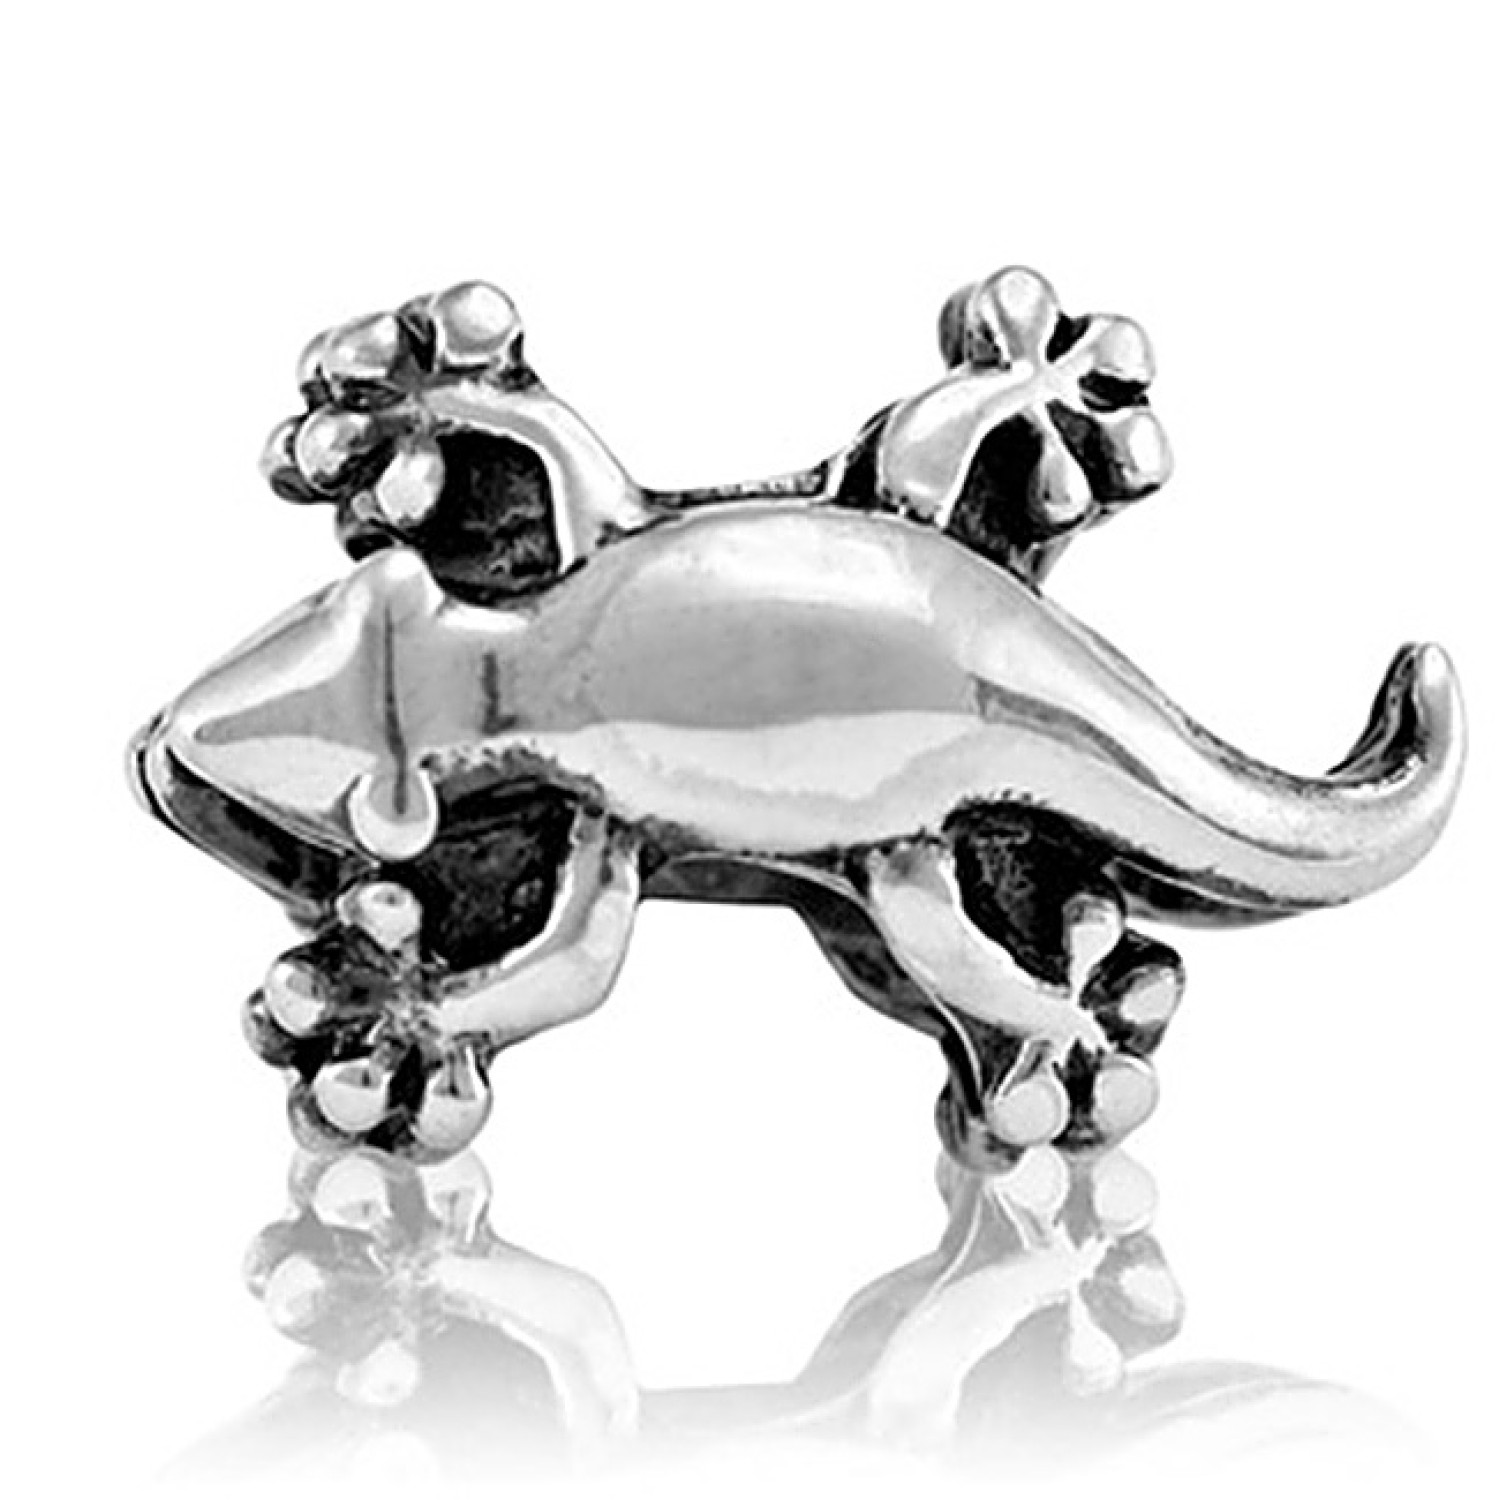 LK163 Evolve 925  Charm New Zealand Gecko. LK163 Evolve 925 Sterling Silver Charm New Zealand Gecko There are at least 39 species of gecko in New Zealand, all known for their speed and agility. Geckos’ toes are covered with tiny hairs that allow them to c